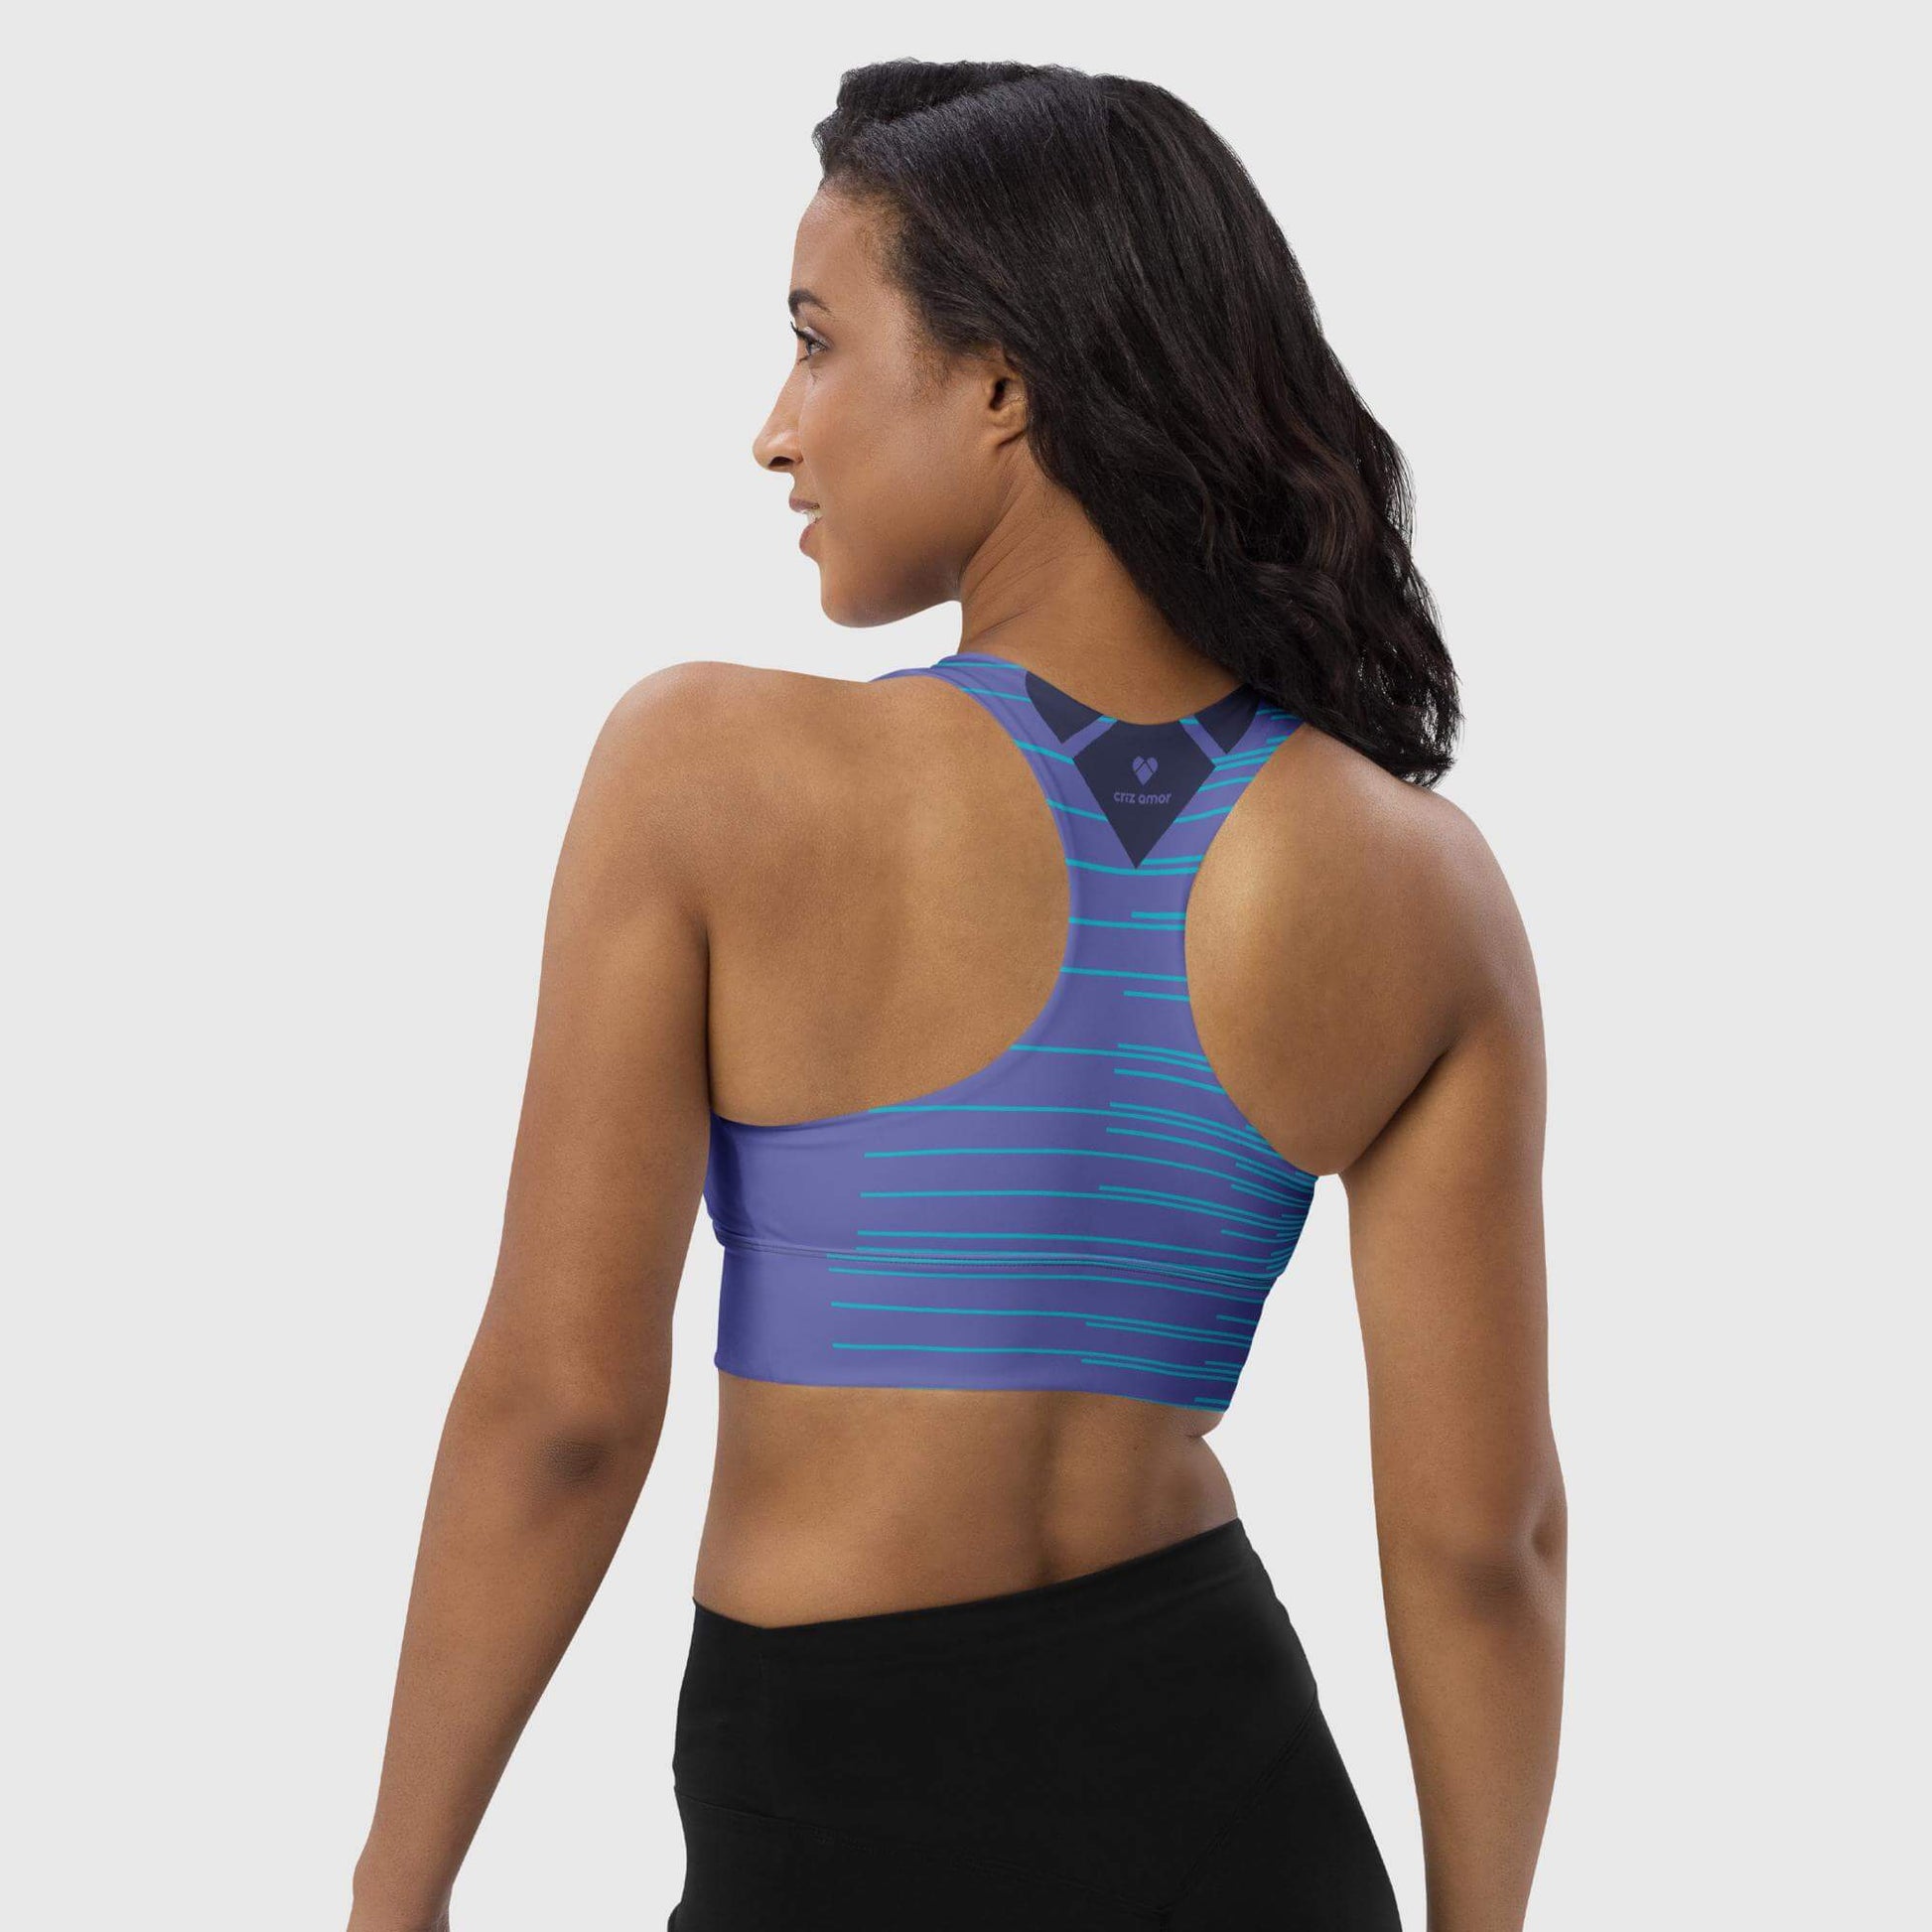 Amor Dual Collection: Periwinkle and Turquoise Sports Bra